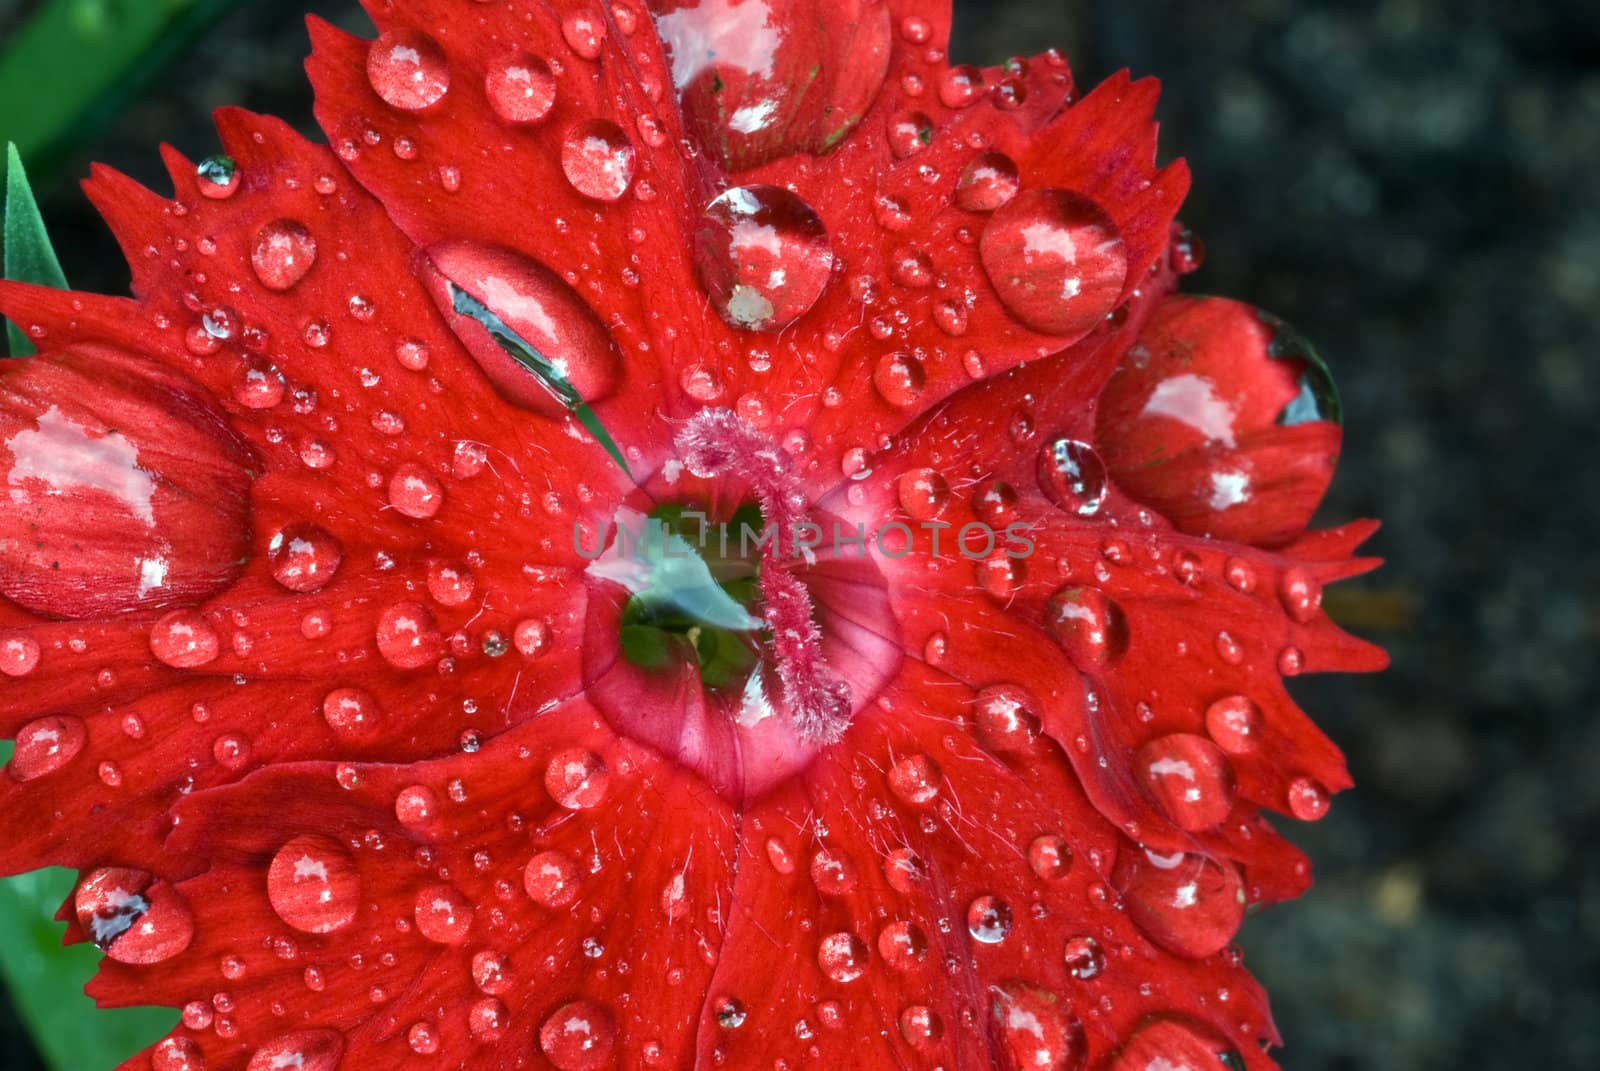 The wild red carnation by Severas